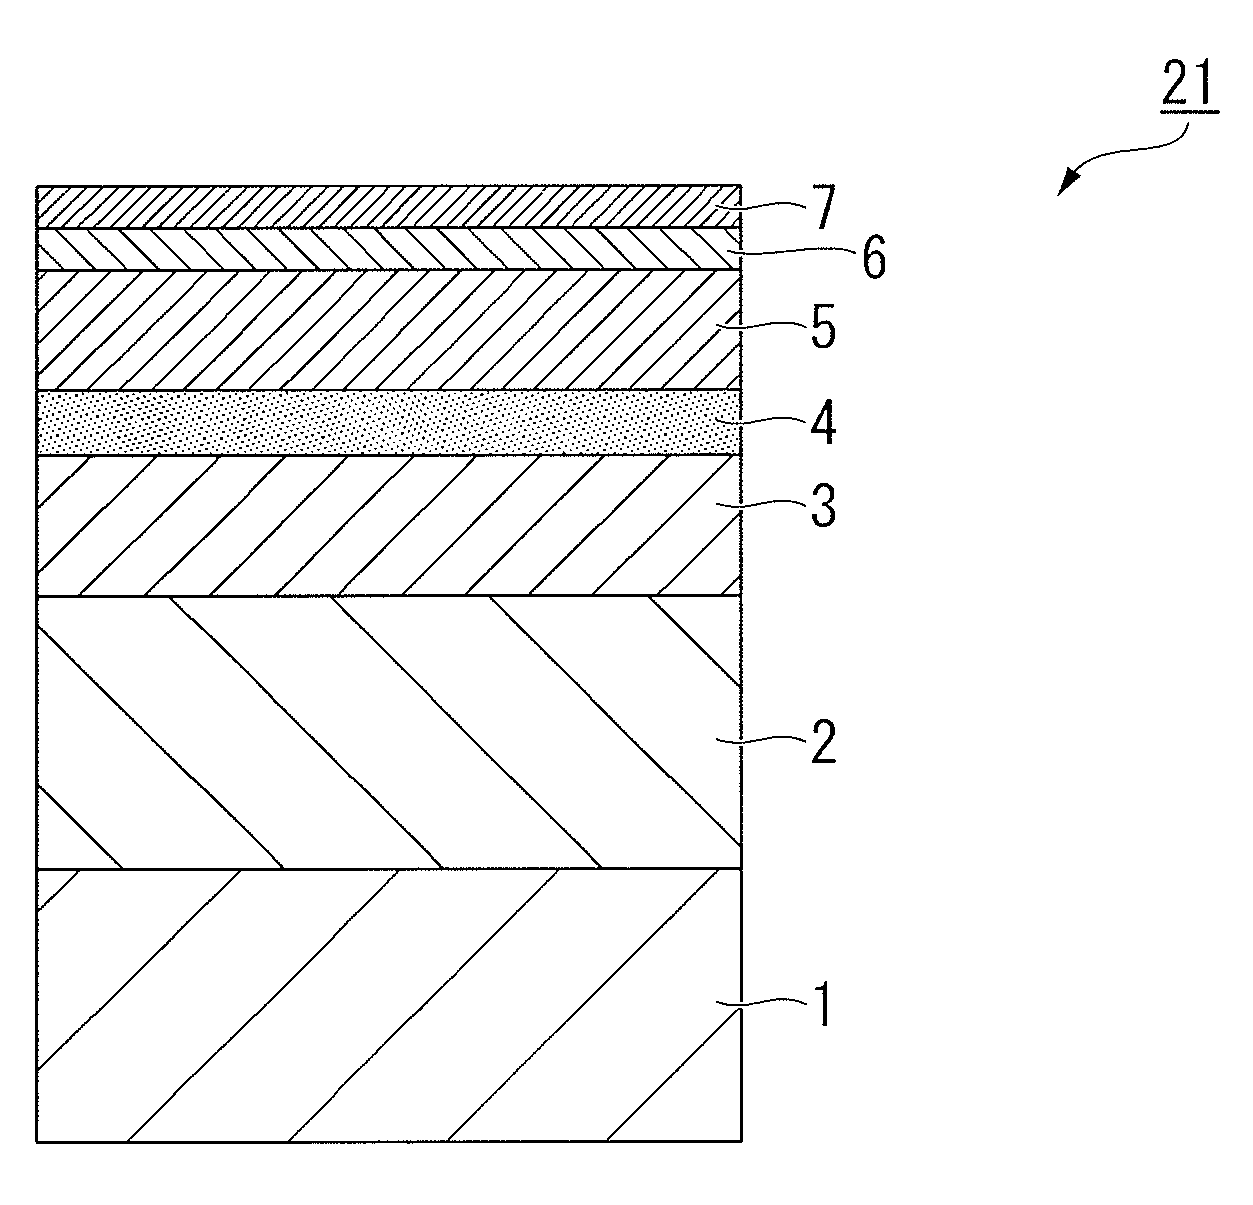 Heat-assisted magnetic recording medium and magnetic storage device